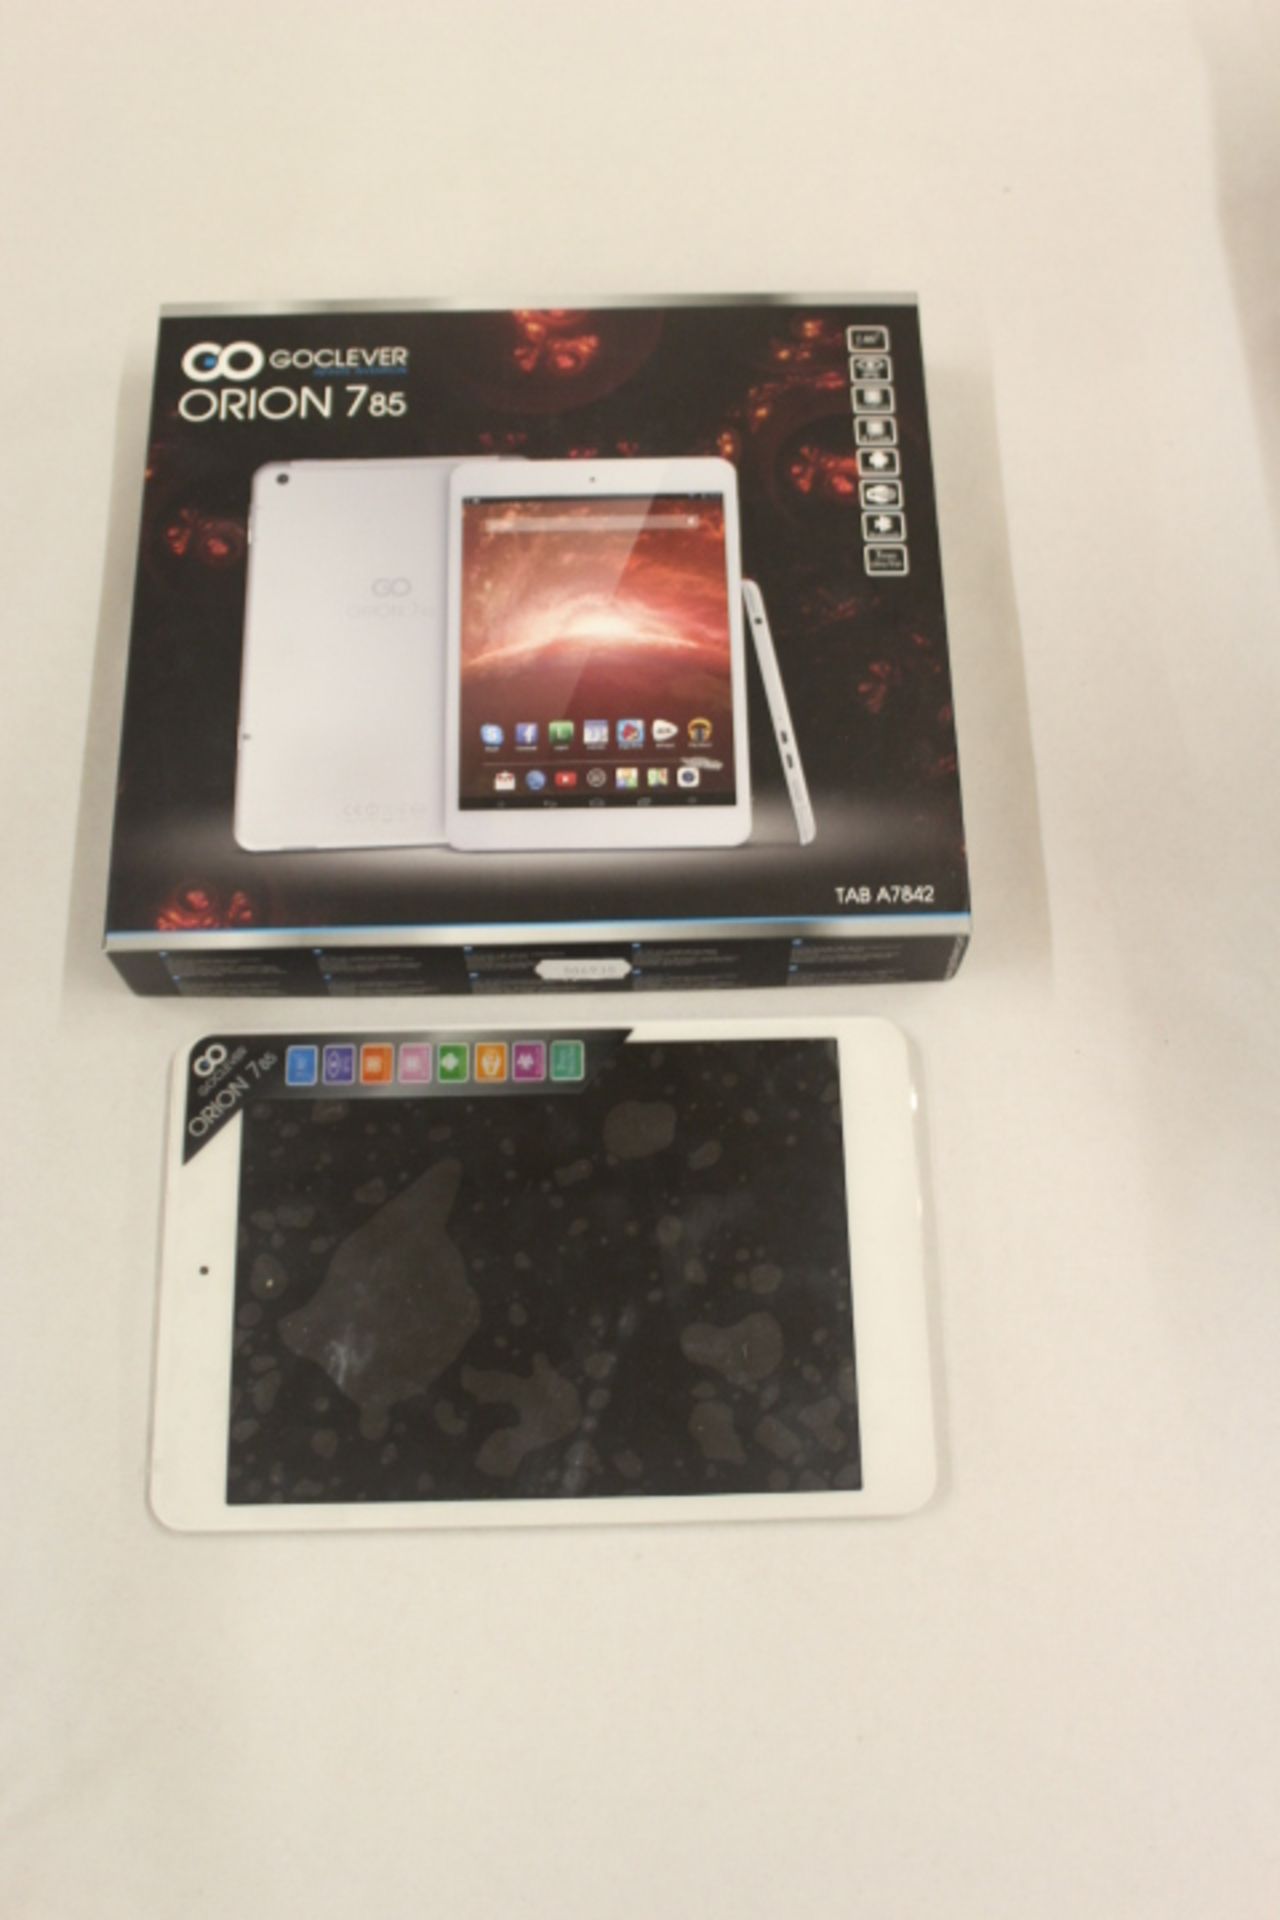 V GOCLEVER 7.85 IPS Tablet 1024X768 4:3 X4 CPU 1GB 8GB BT Android 4.2 RRP £89 - Item Is A 14 DAY